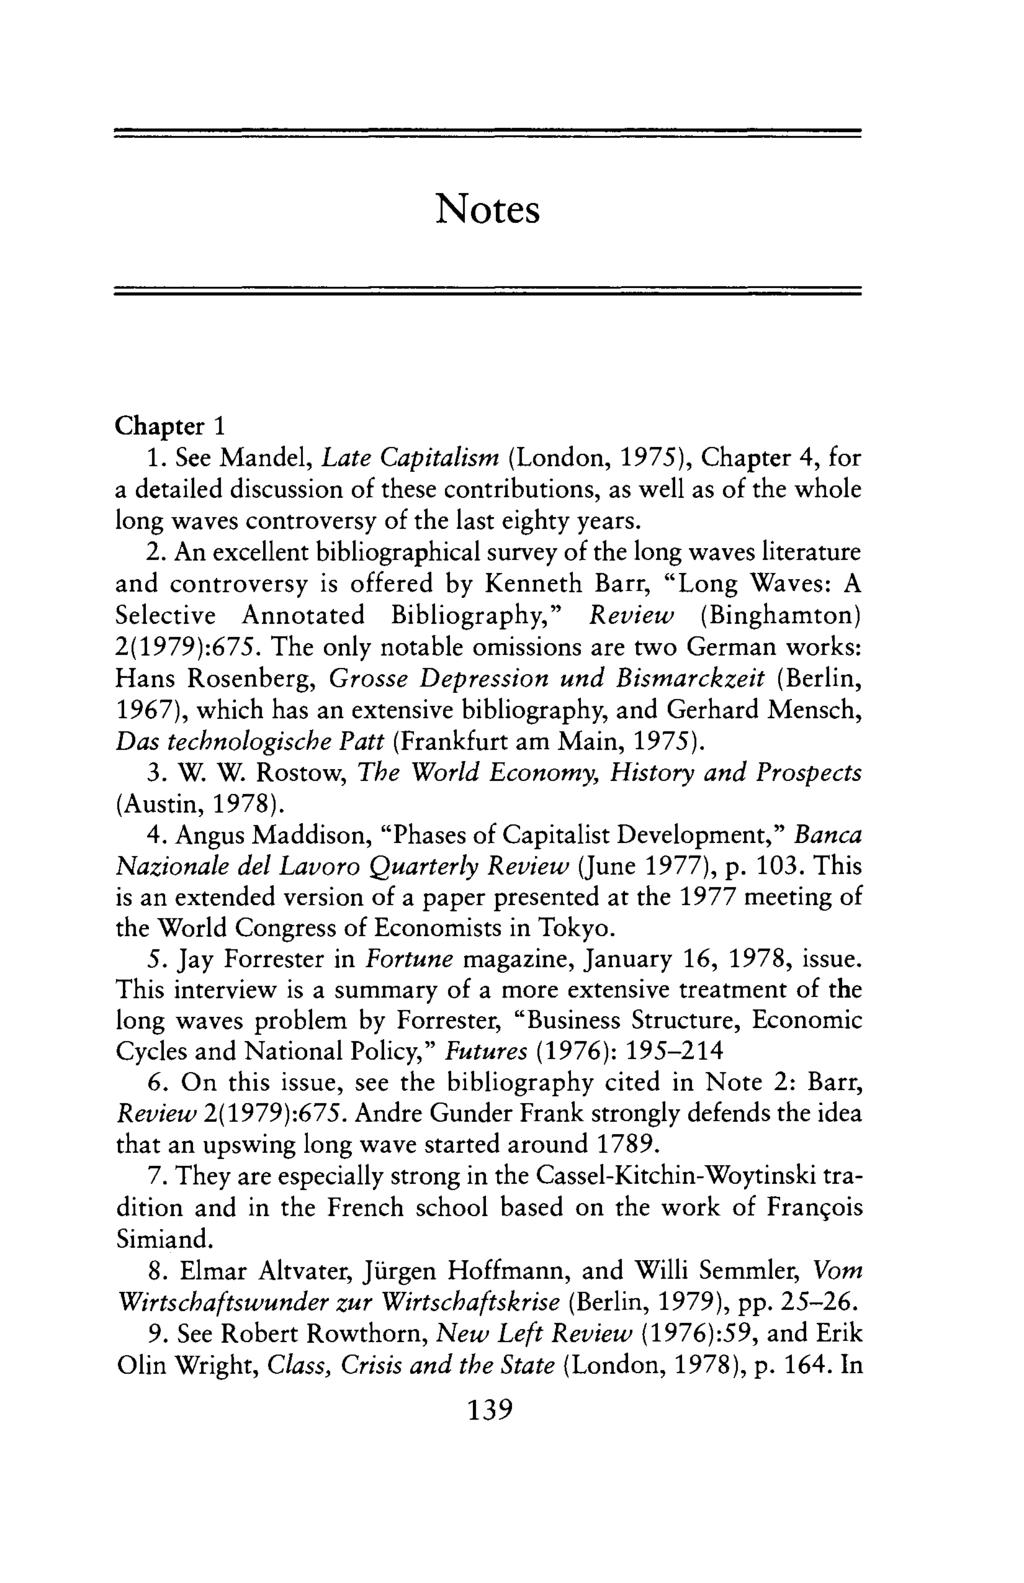 Notes Chapter 1 1. See Mandel, Late Capitalism (London, 1975), Chapter 4, for a detailed discussion of these contributions, as well as of the whole long waves controversy of the last eighty years. 2.